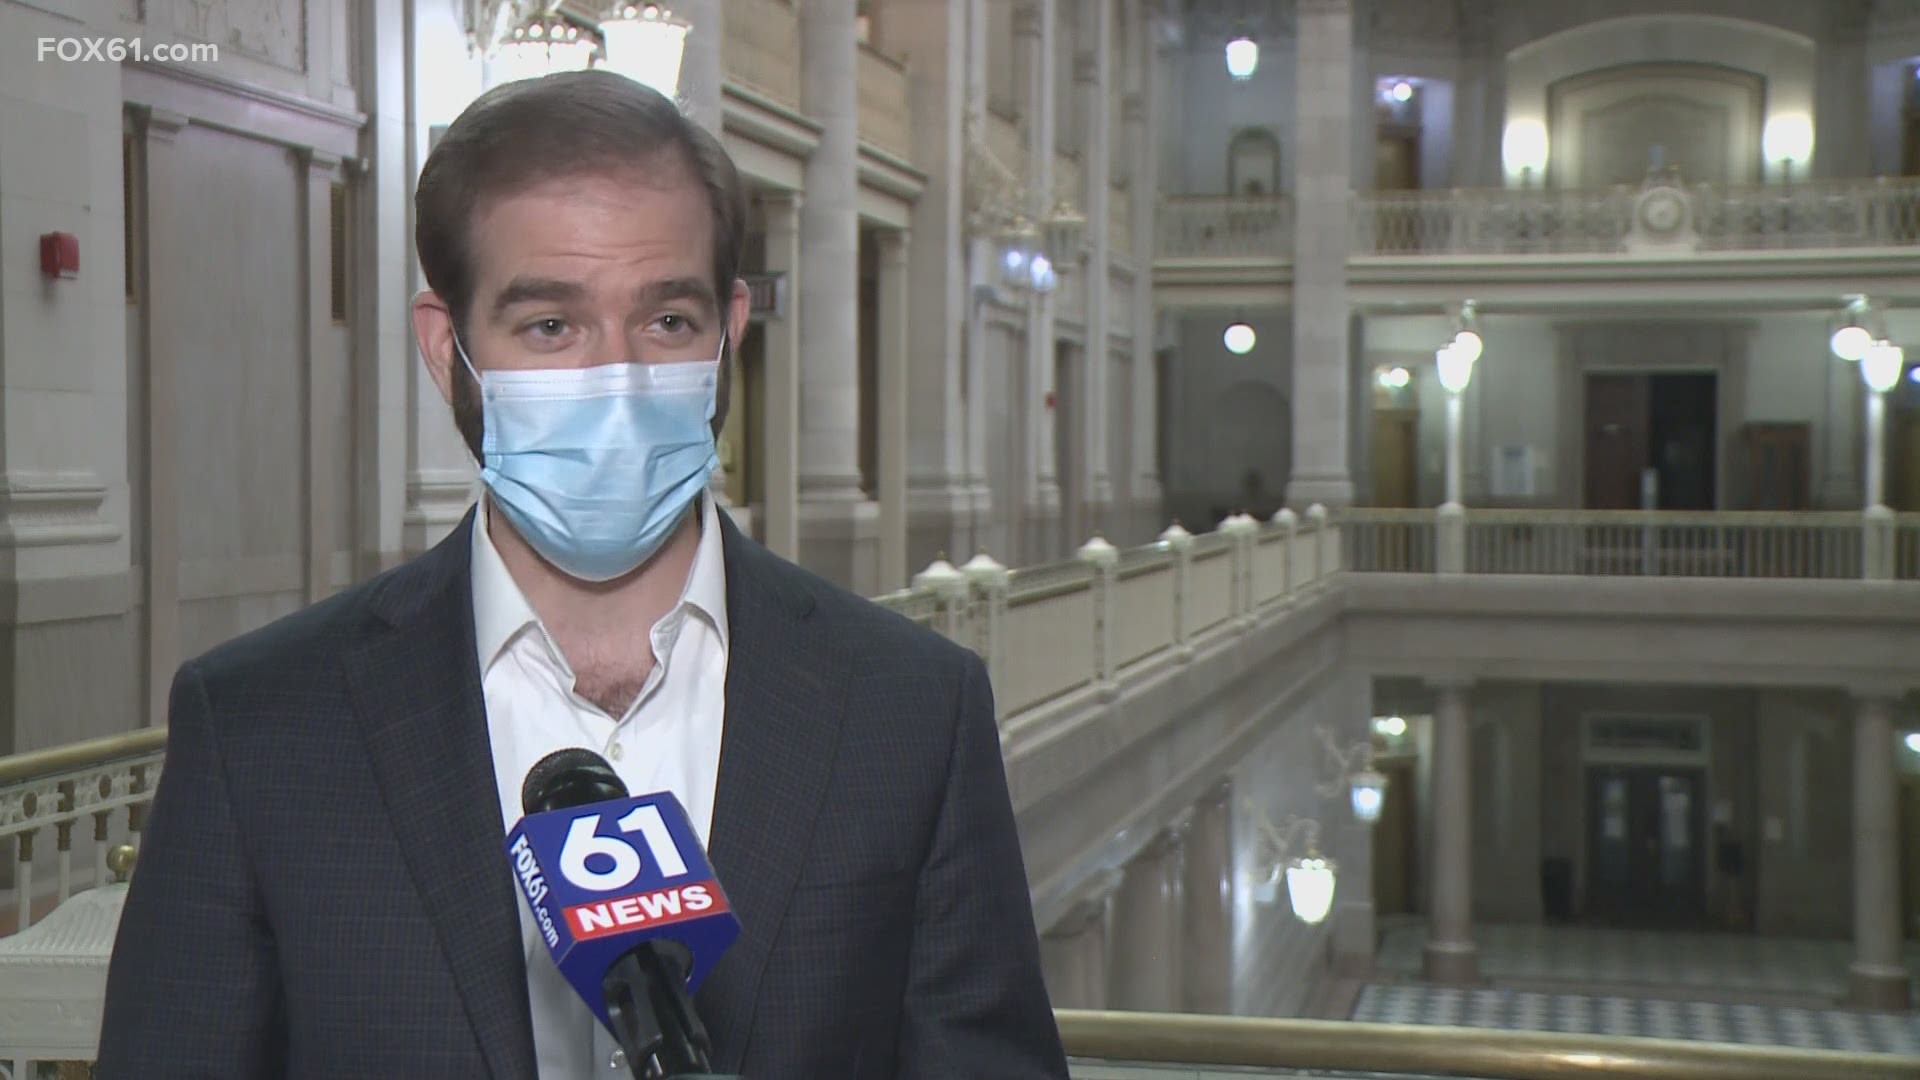 Mayor Bronin said he --like many other mayors --appreciate the new administration's determination to launch a full-scale federal effort to get more people vaccinated